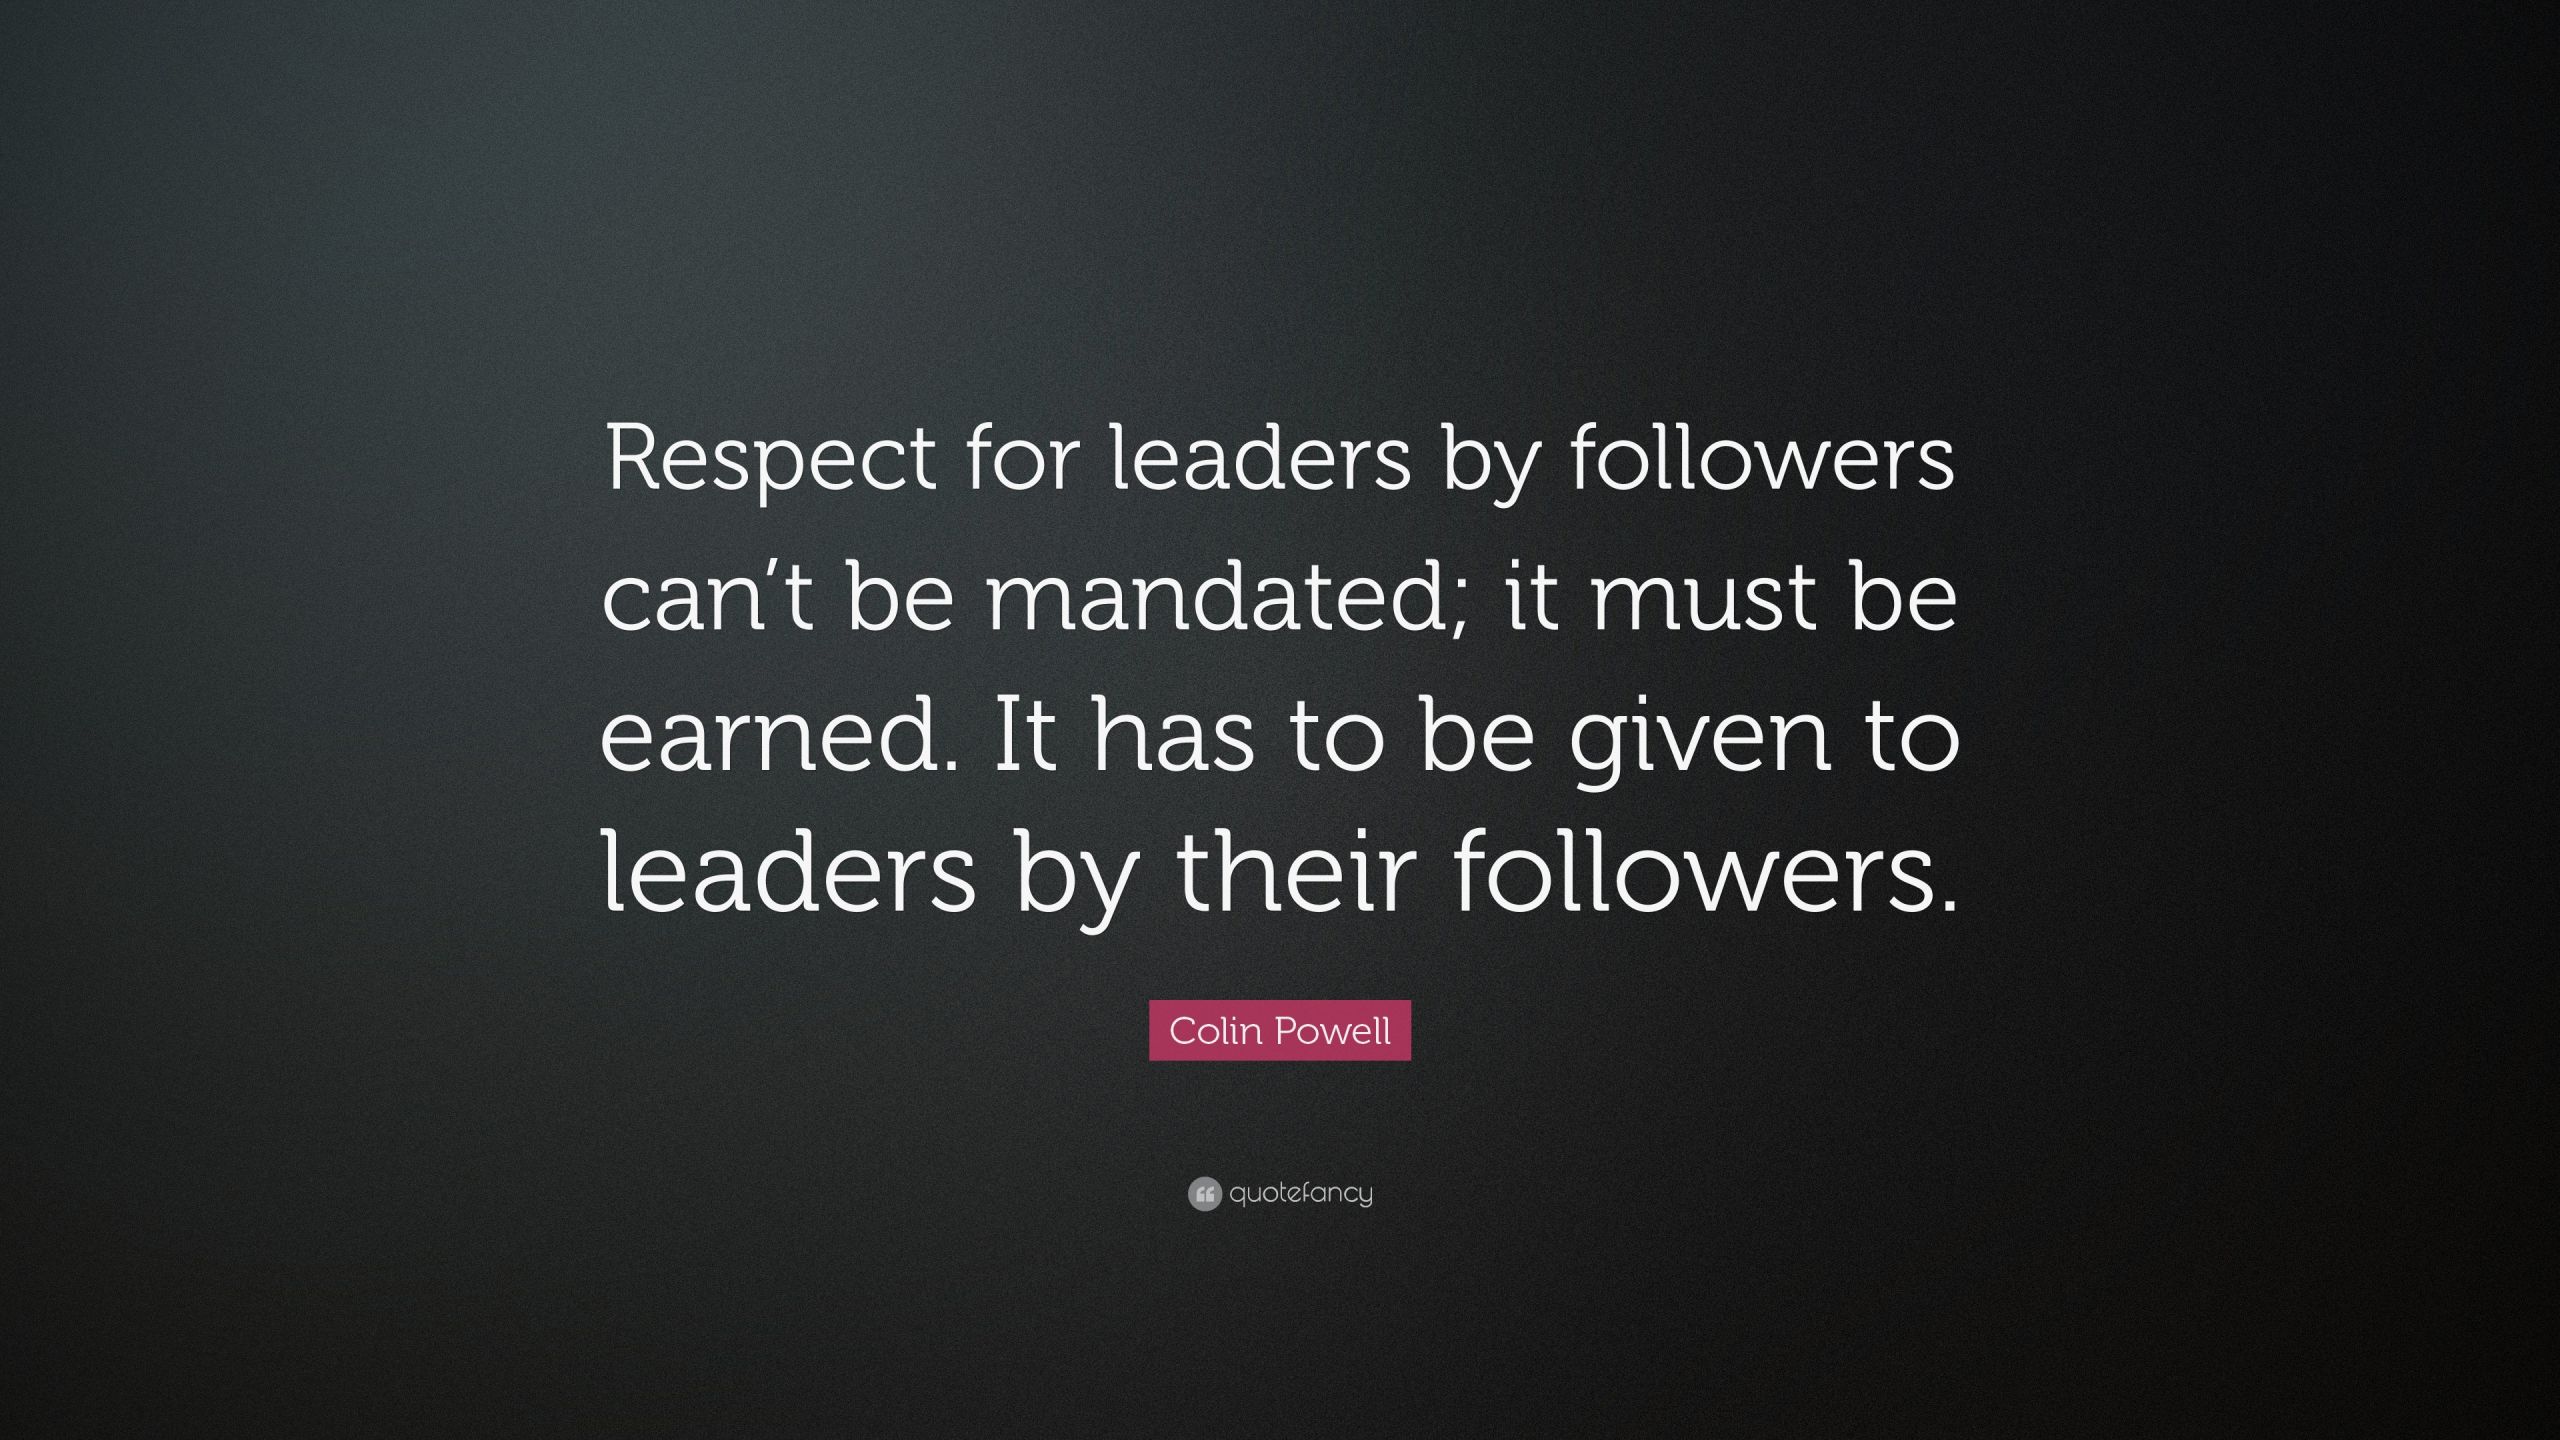 Colin Powell Quote Leadership
 Colin Powell Quote “Respect for leaders by followers can